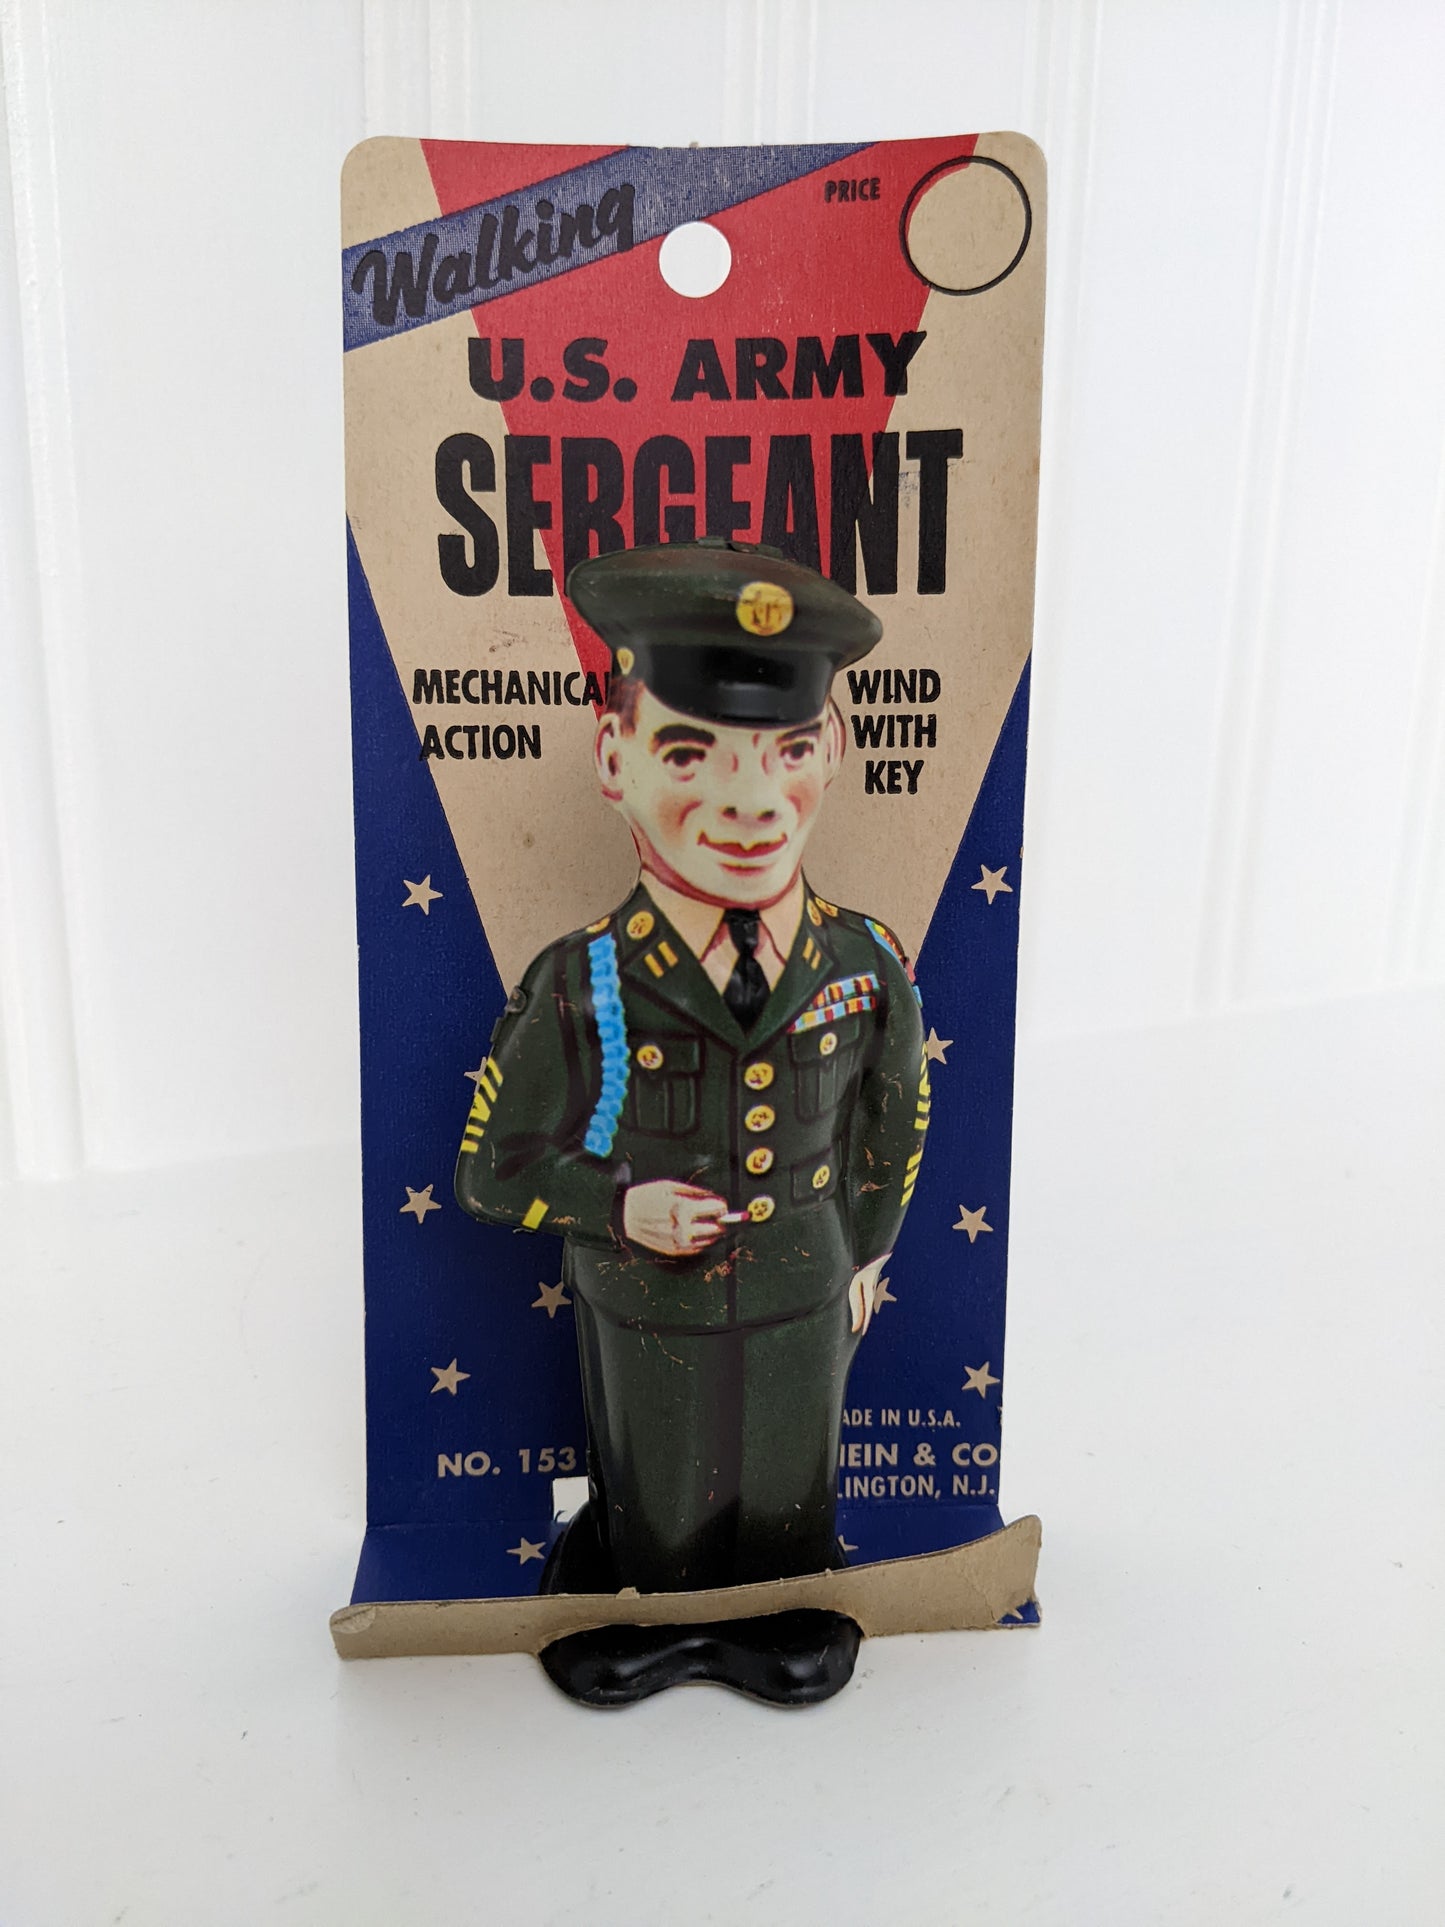 J. Chein Walking U.S. Army Sergeant Tin Wind-up Toy with Packaging